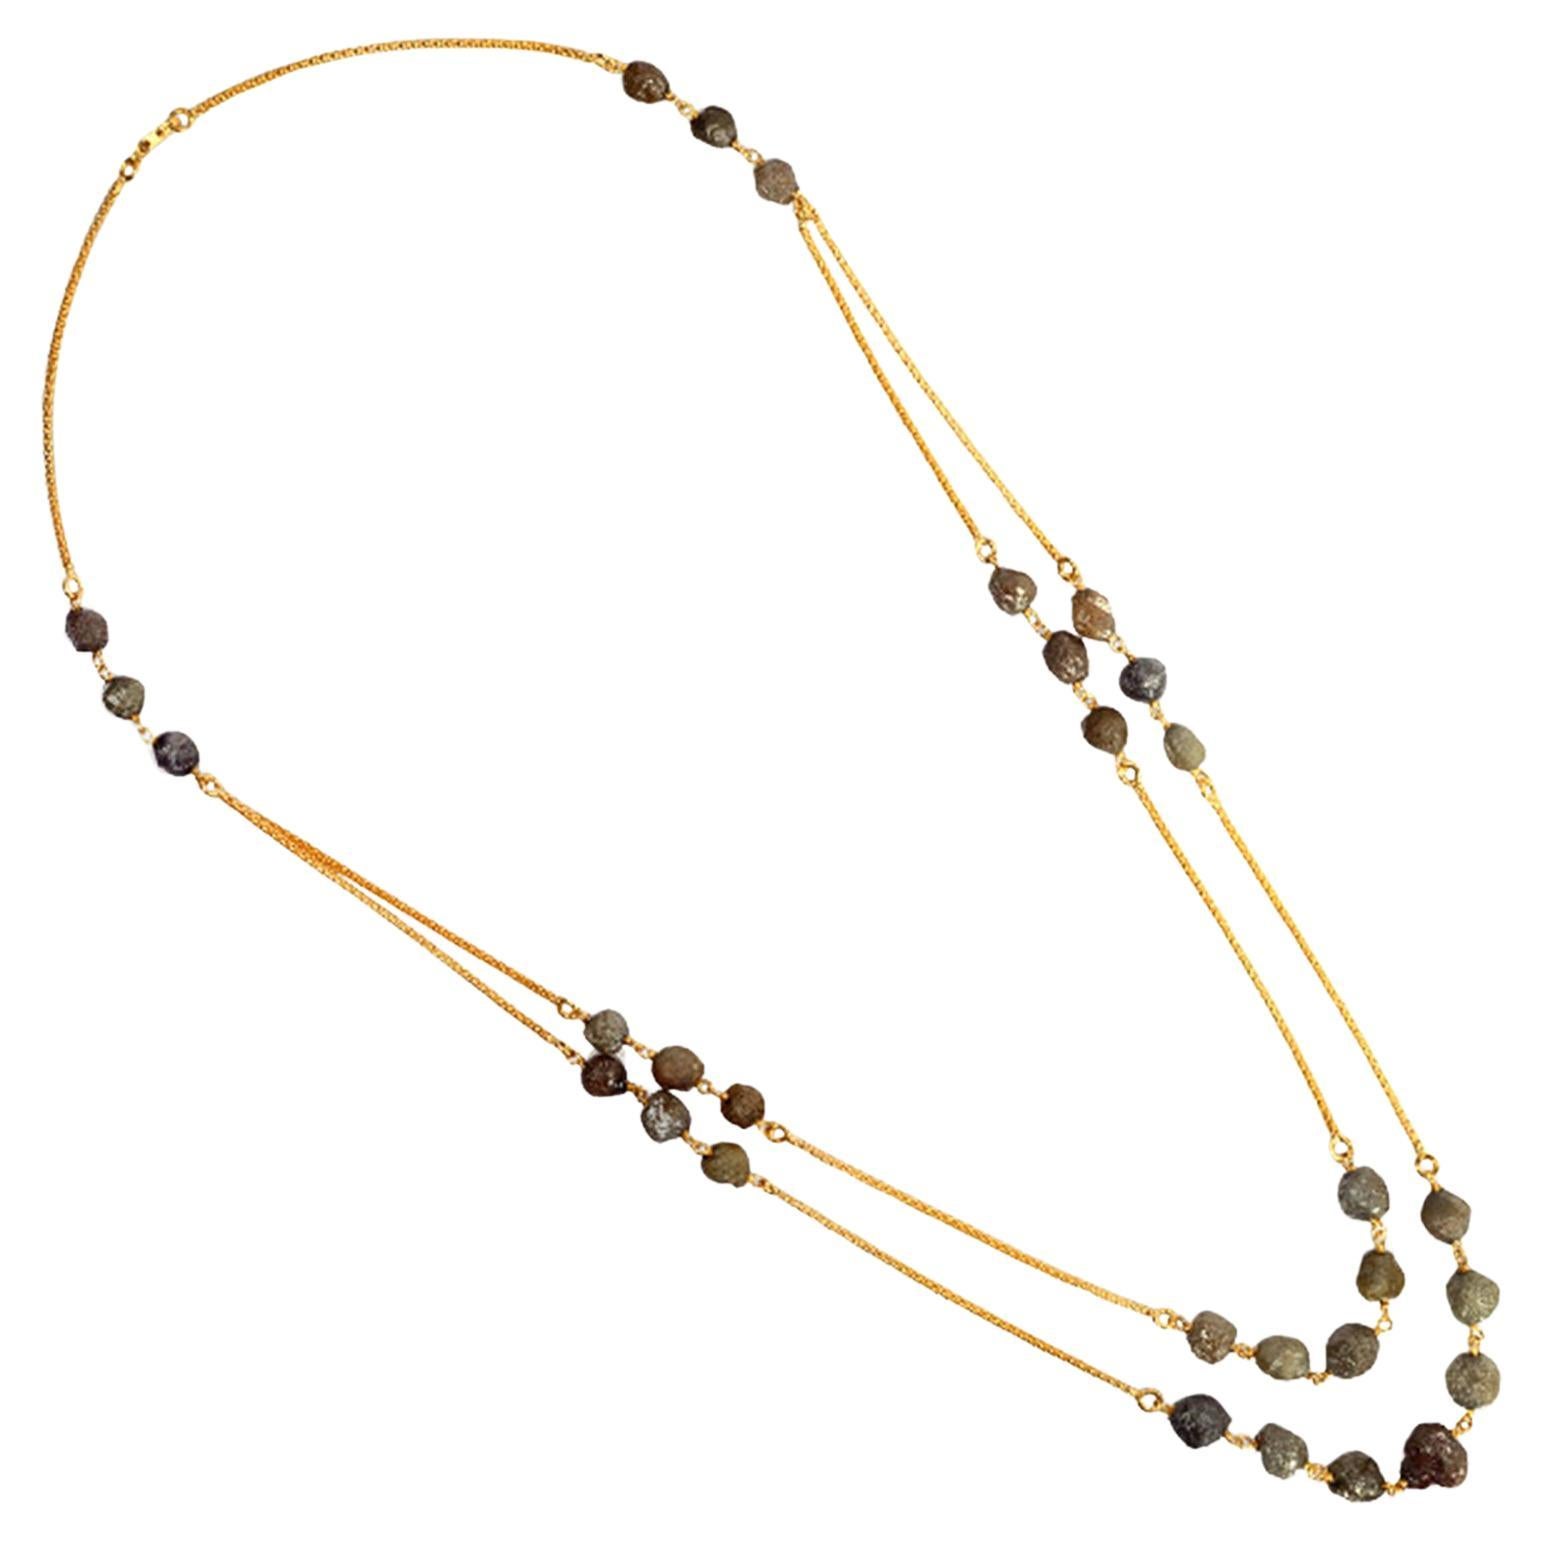 Oragnic Rough Diamond Chain Necklace Made In 18k Yellow Gold